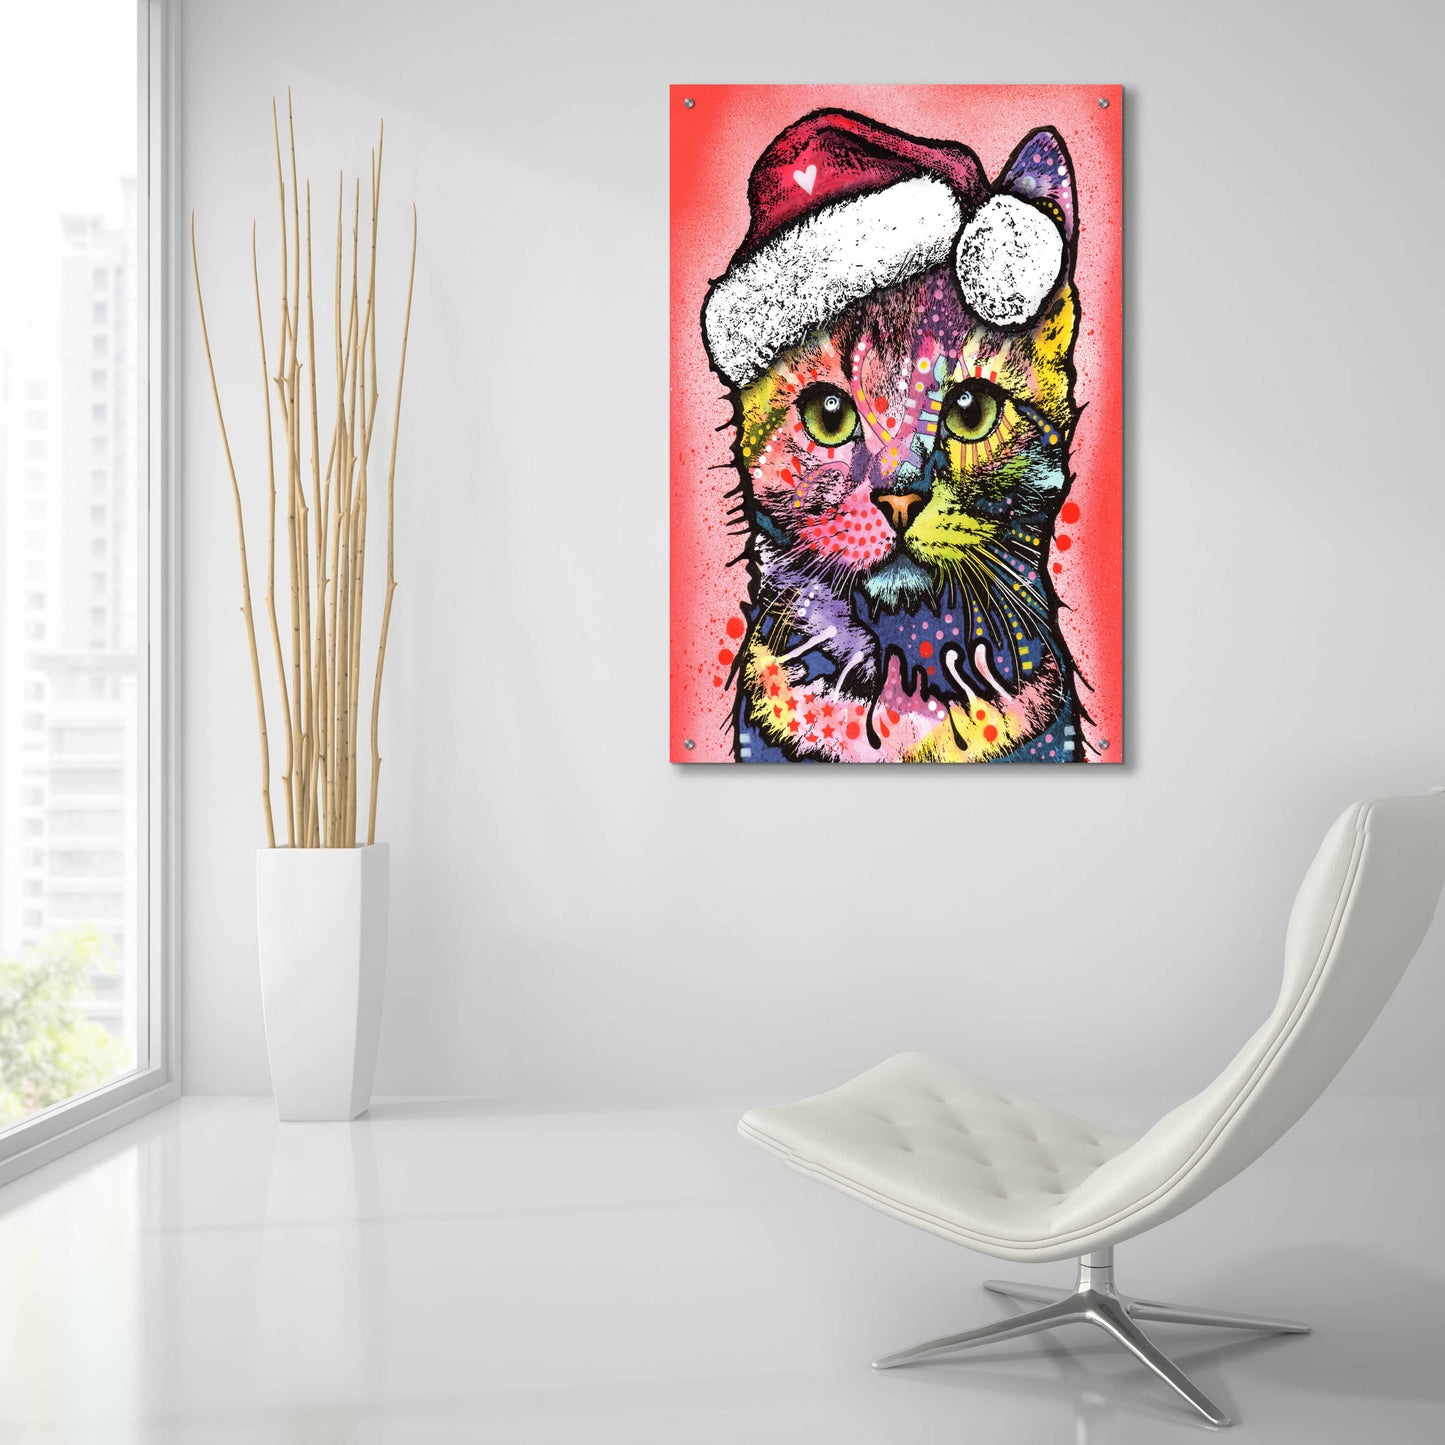 Epic Art 'Christmas Cat' by Dean Russo, Acrylic Glass Wall Art,24x36